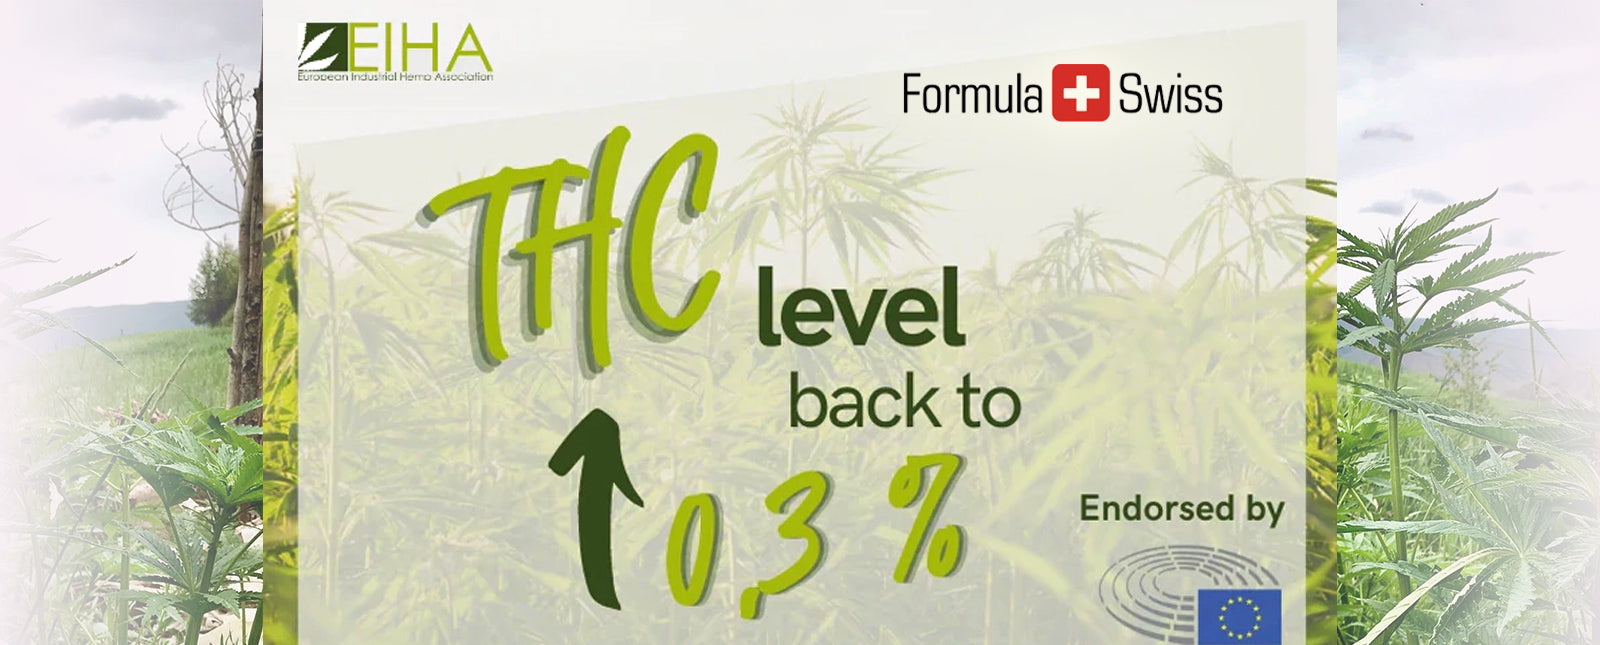 The EU Parliament endorses the increase of THC level for industrial hemp from 0.2 to 0.3%